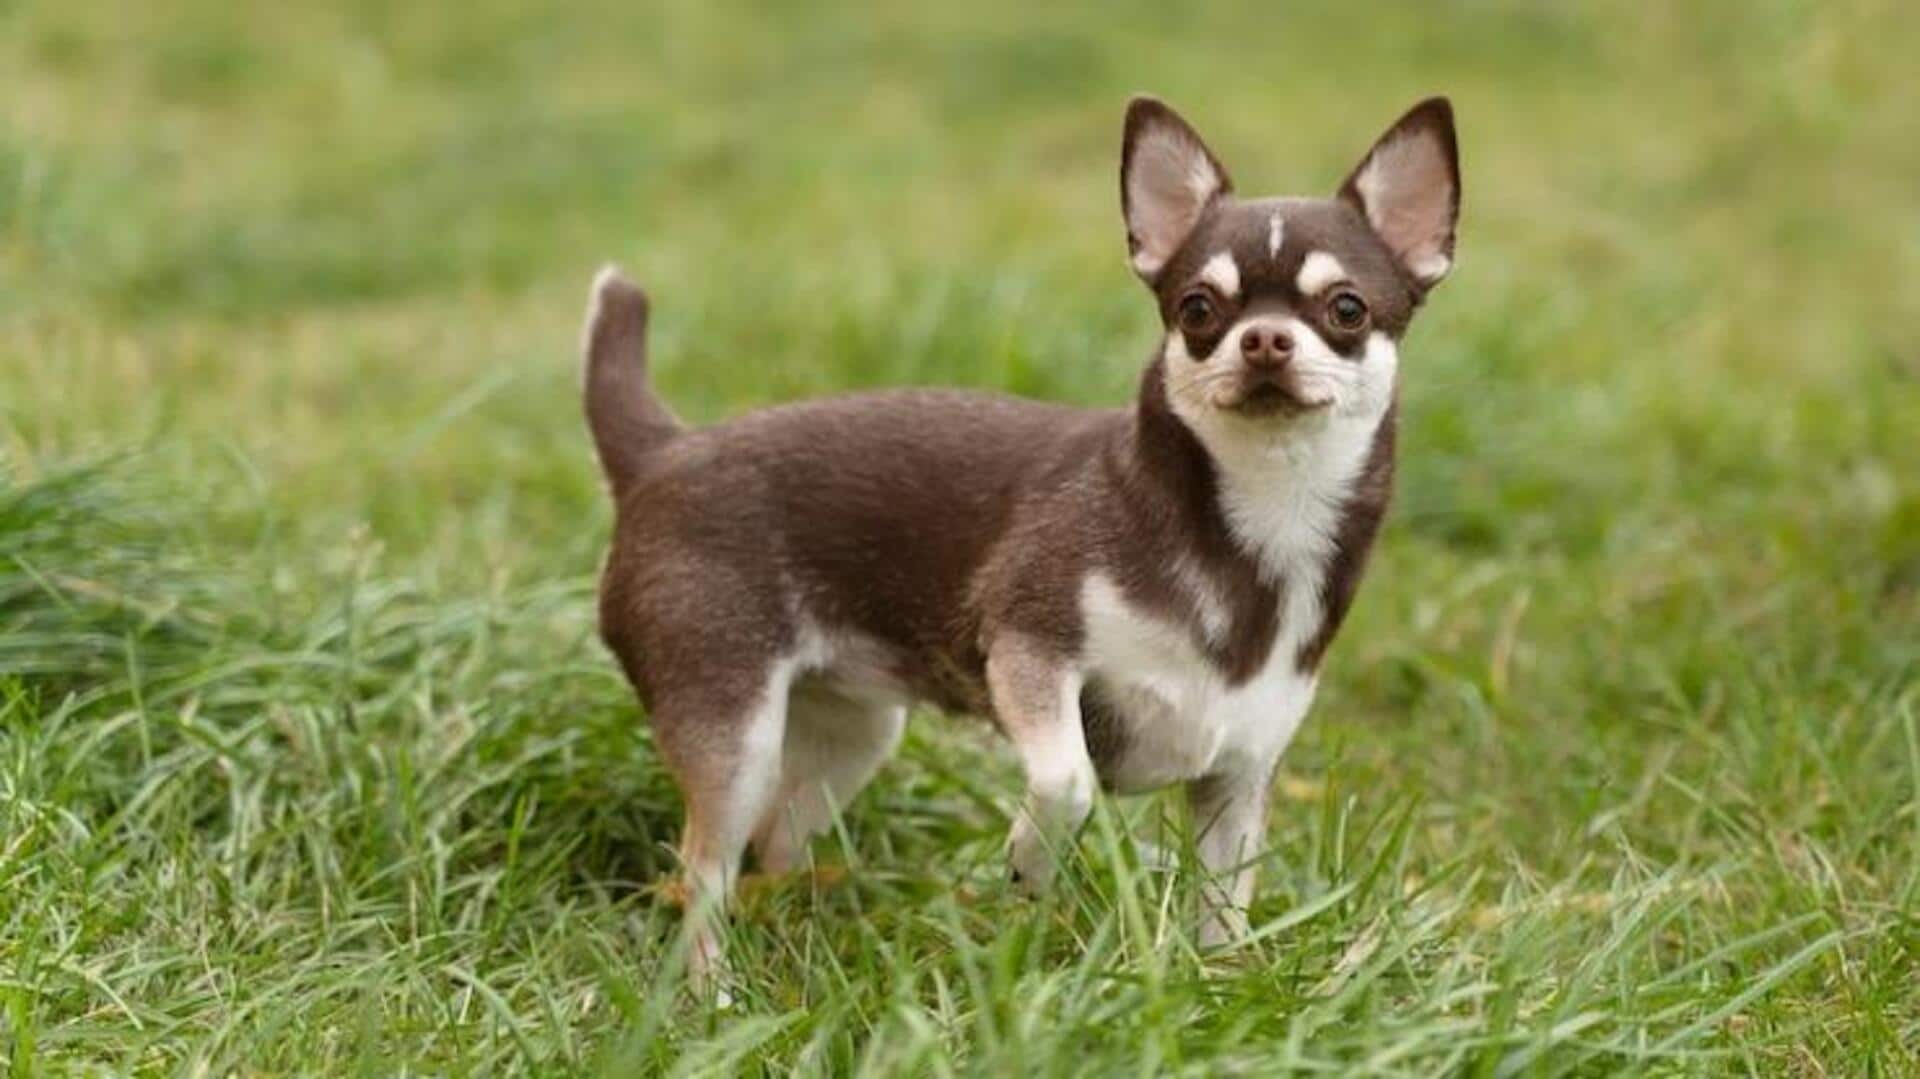 Chihuahua socialization and behavior management: Tips to note